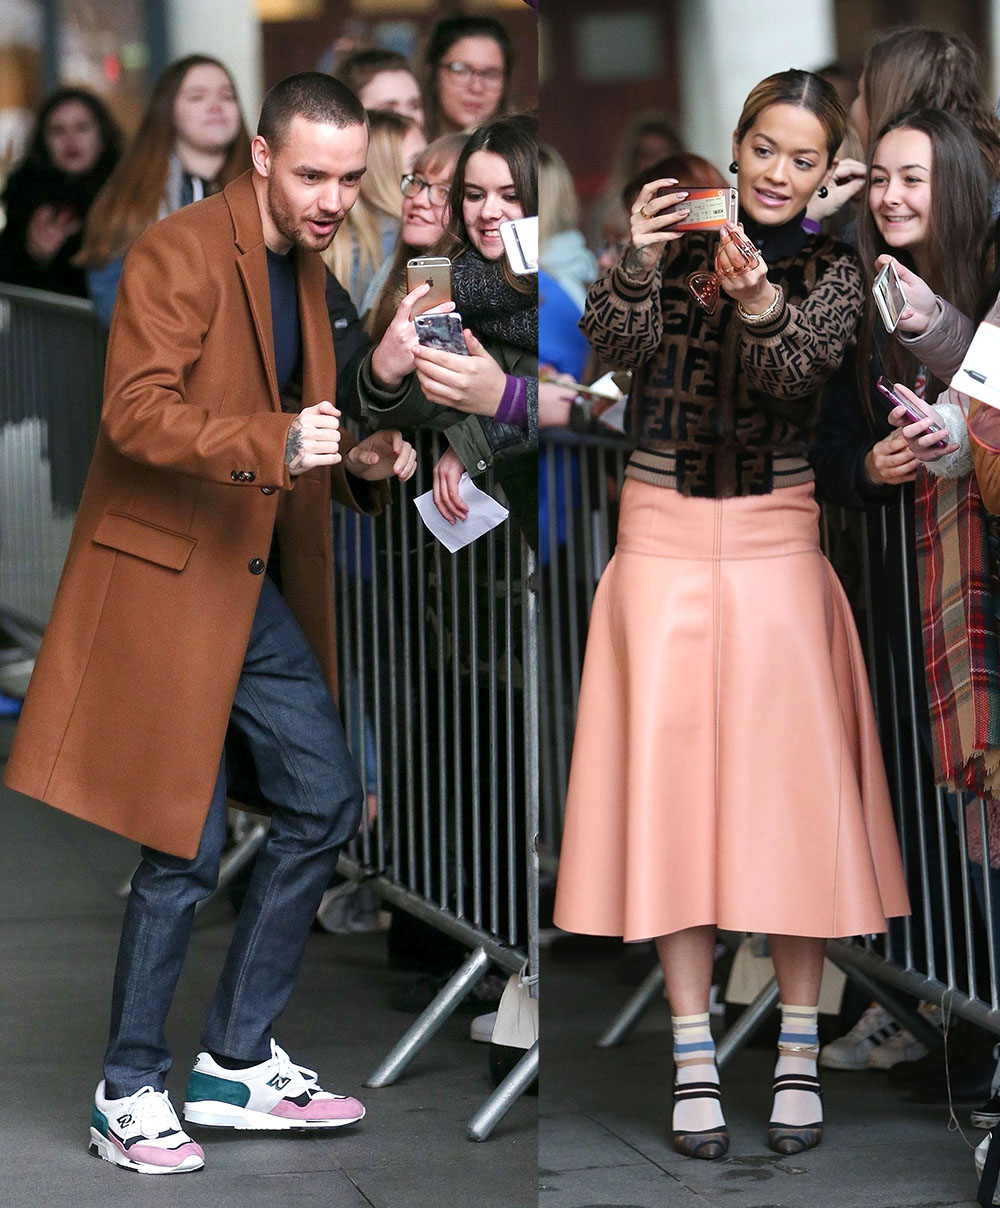 Rita Ora and Liam Payne Meet Fans After a Radio Appearance in London